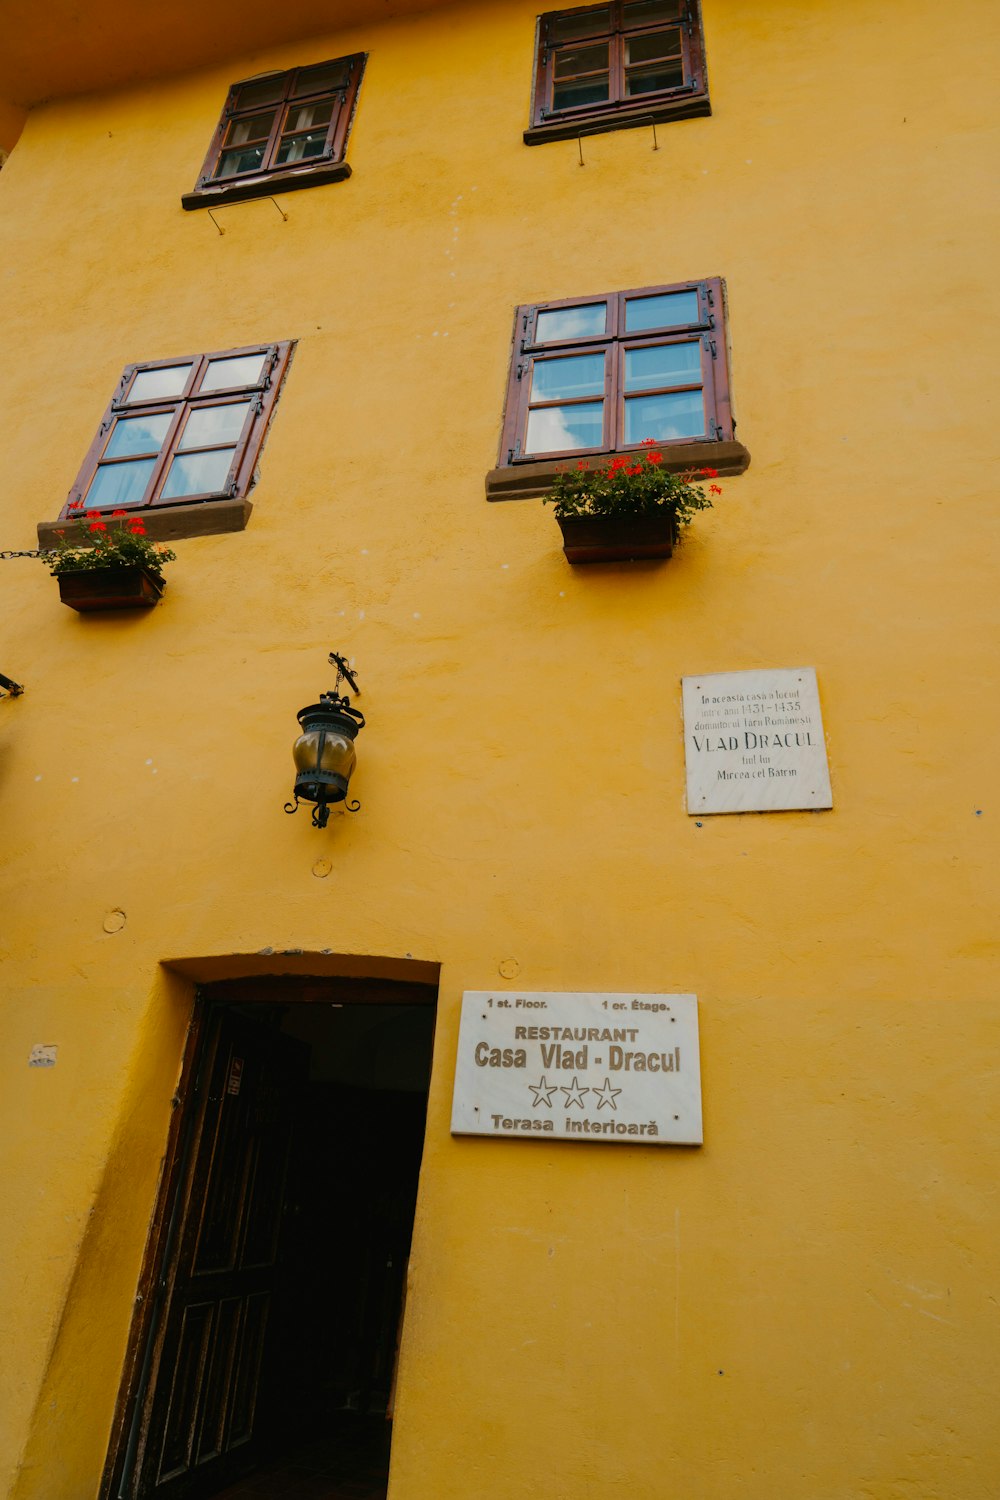 a yellow building with three windows and a sign on the side